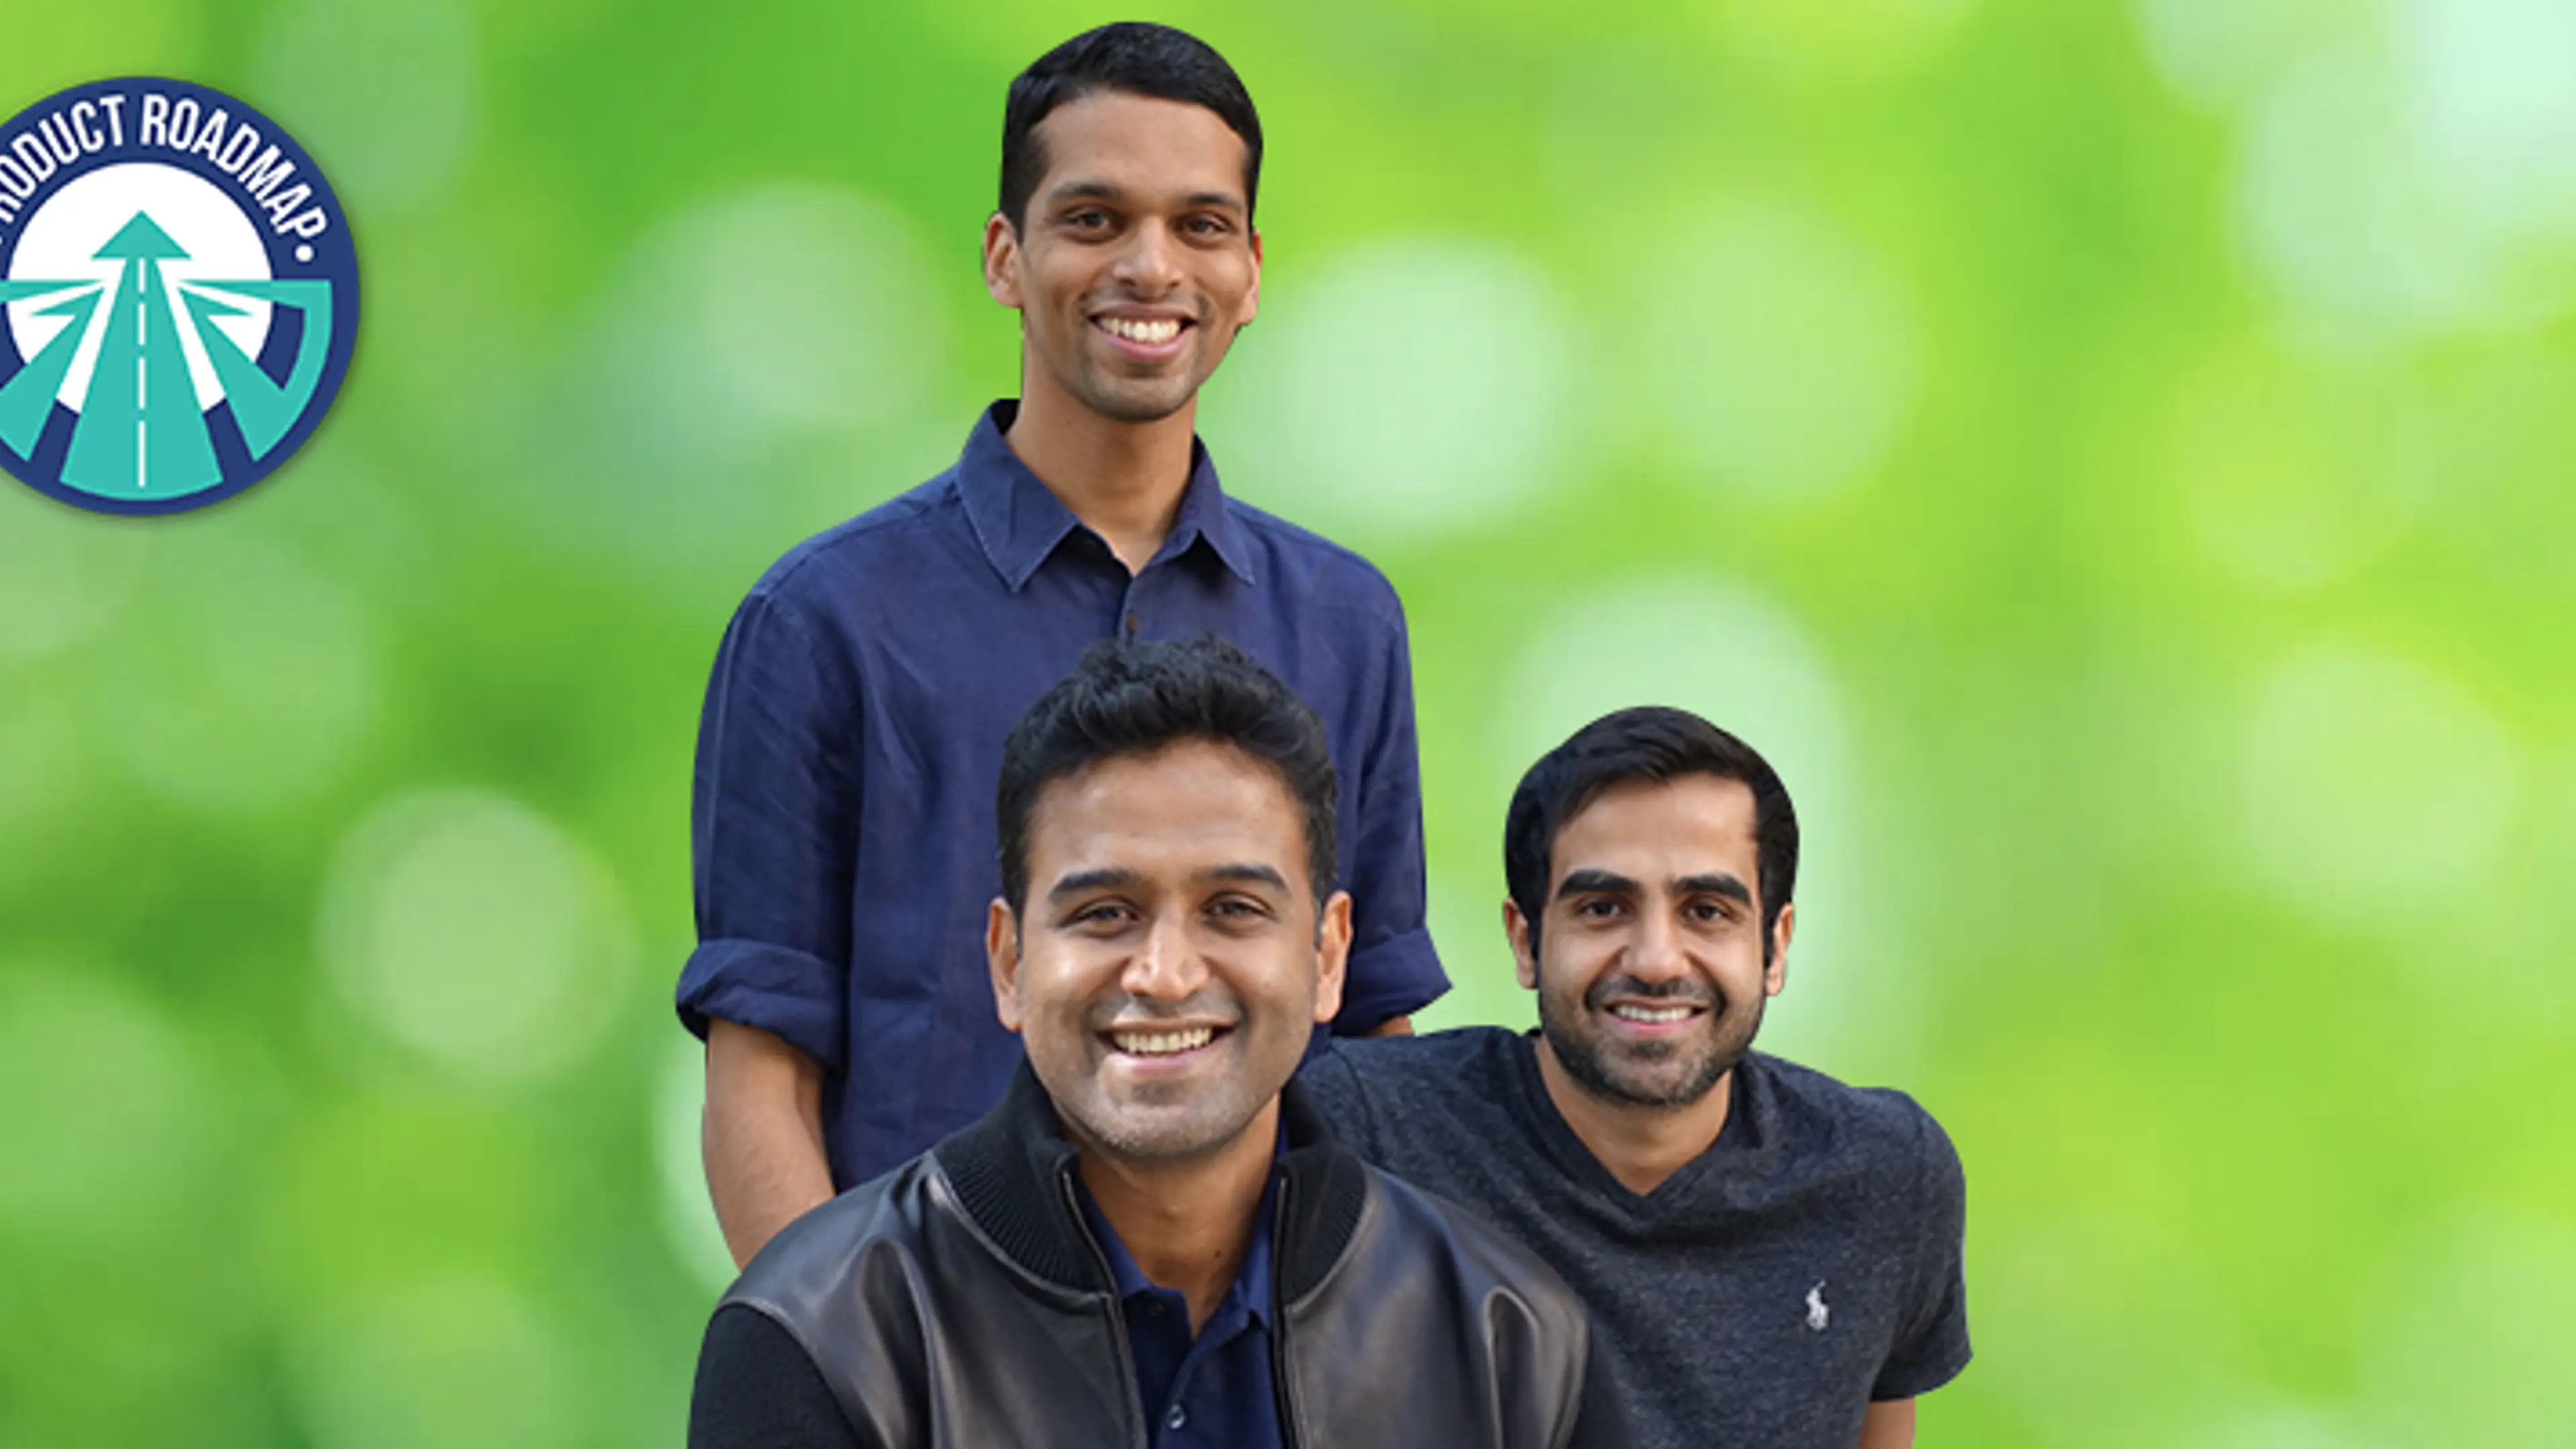 [Product Roadmap] The evolution of Zerodha, one of India's largest retail online brokerages
